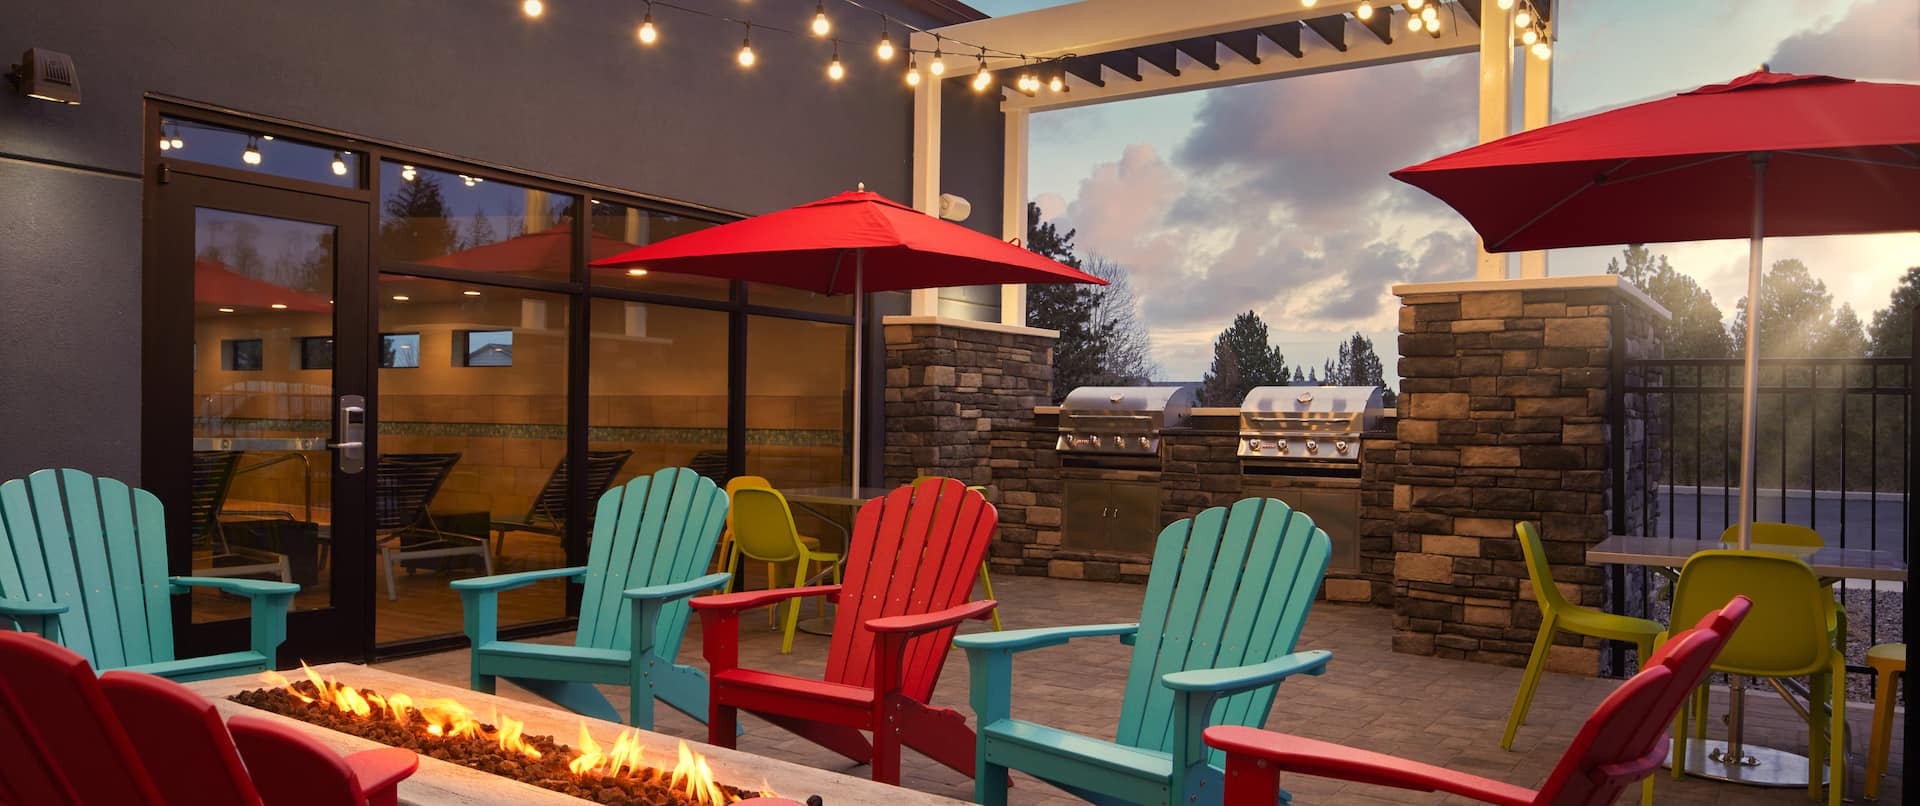 outdoor patio with firepit and grills